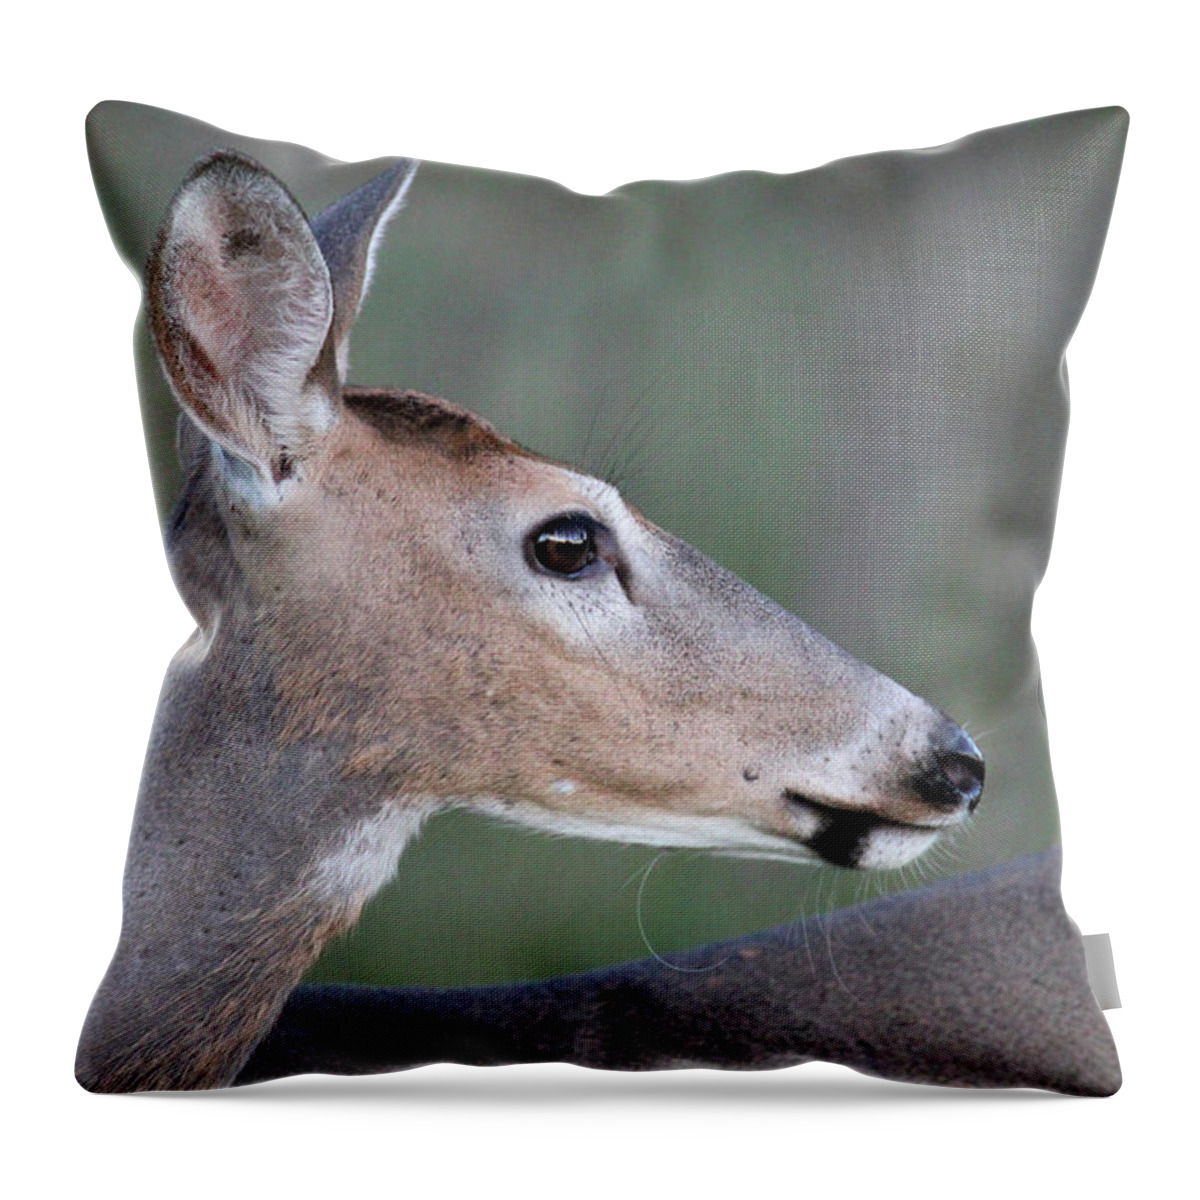 Deer Throw Pillow featuring the photograph Doe Side Profile by Brook Burling